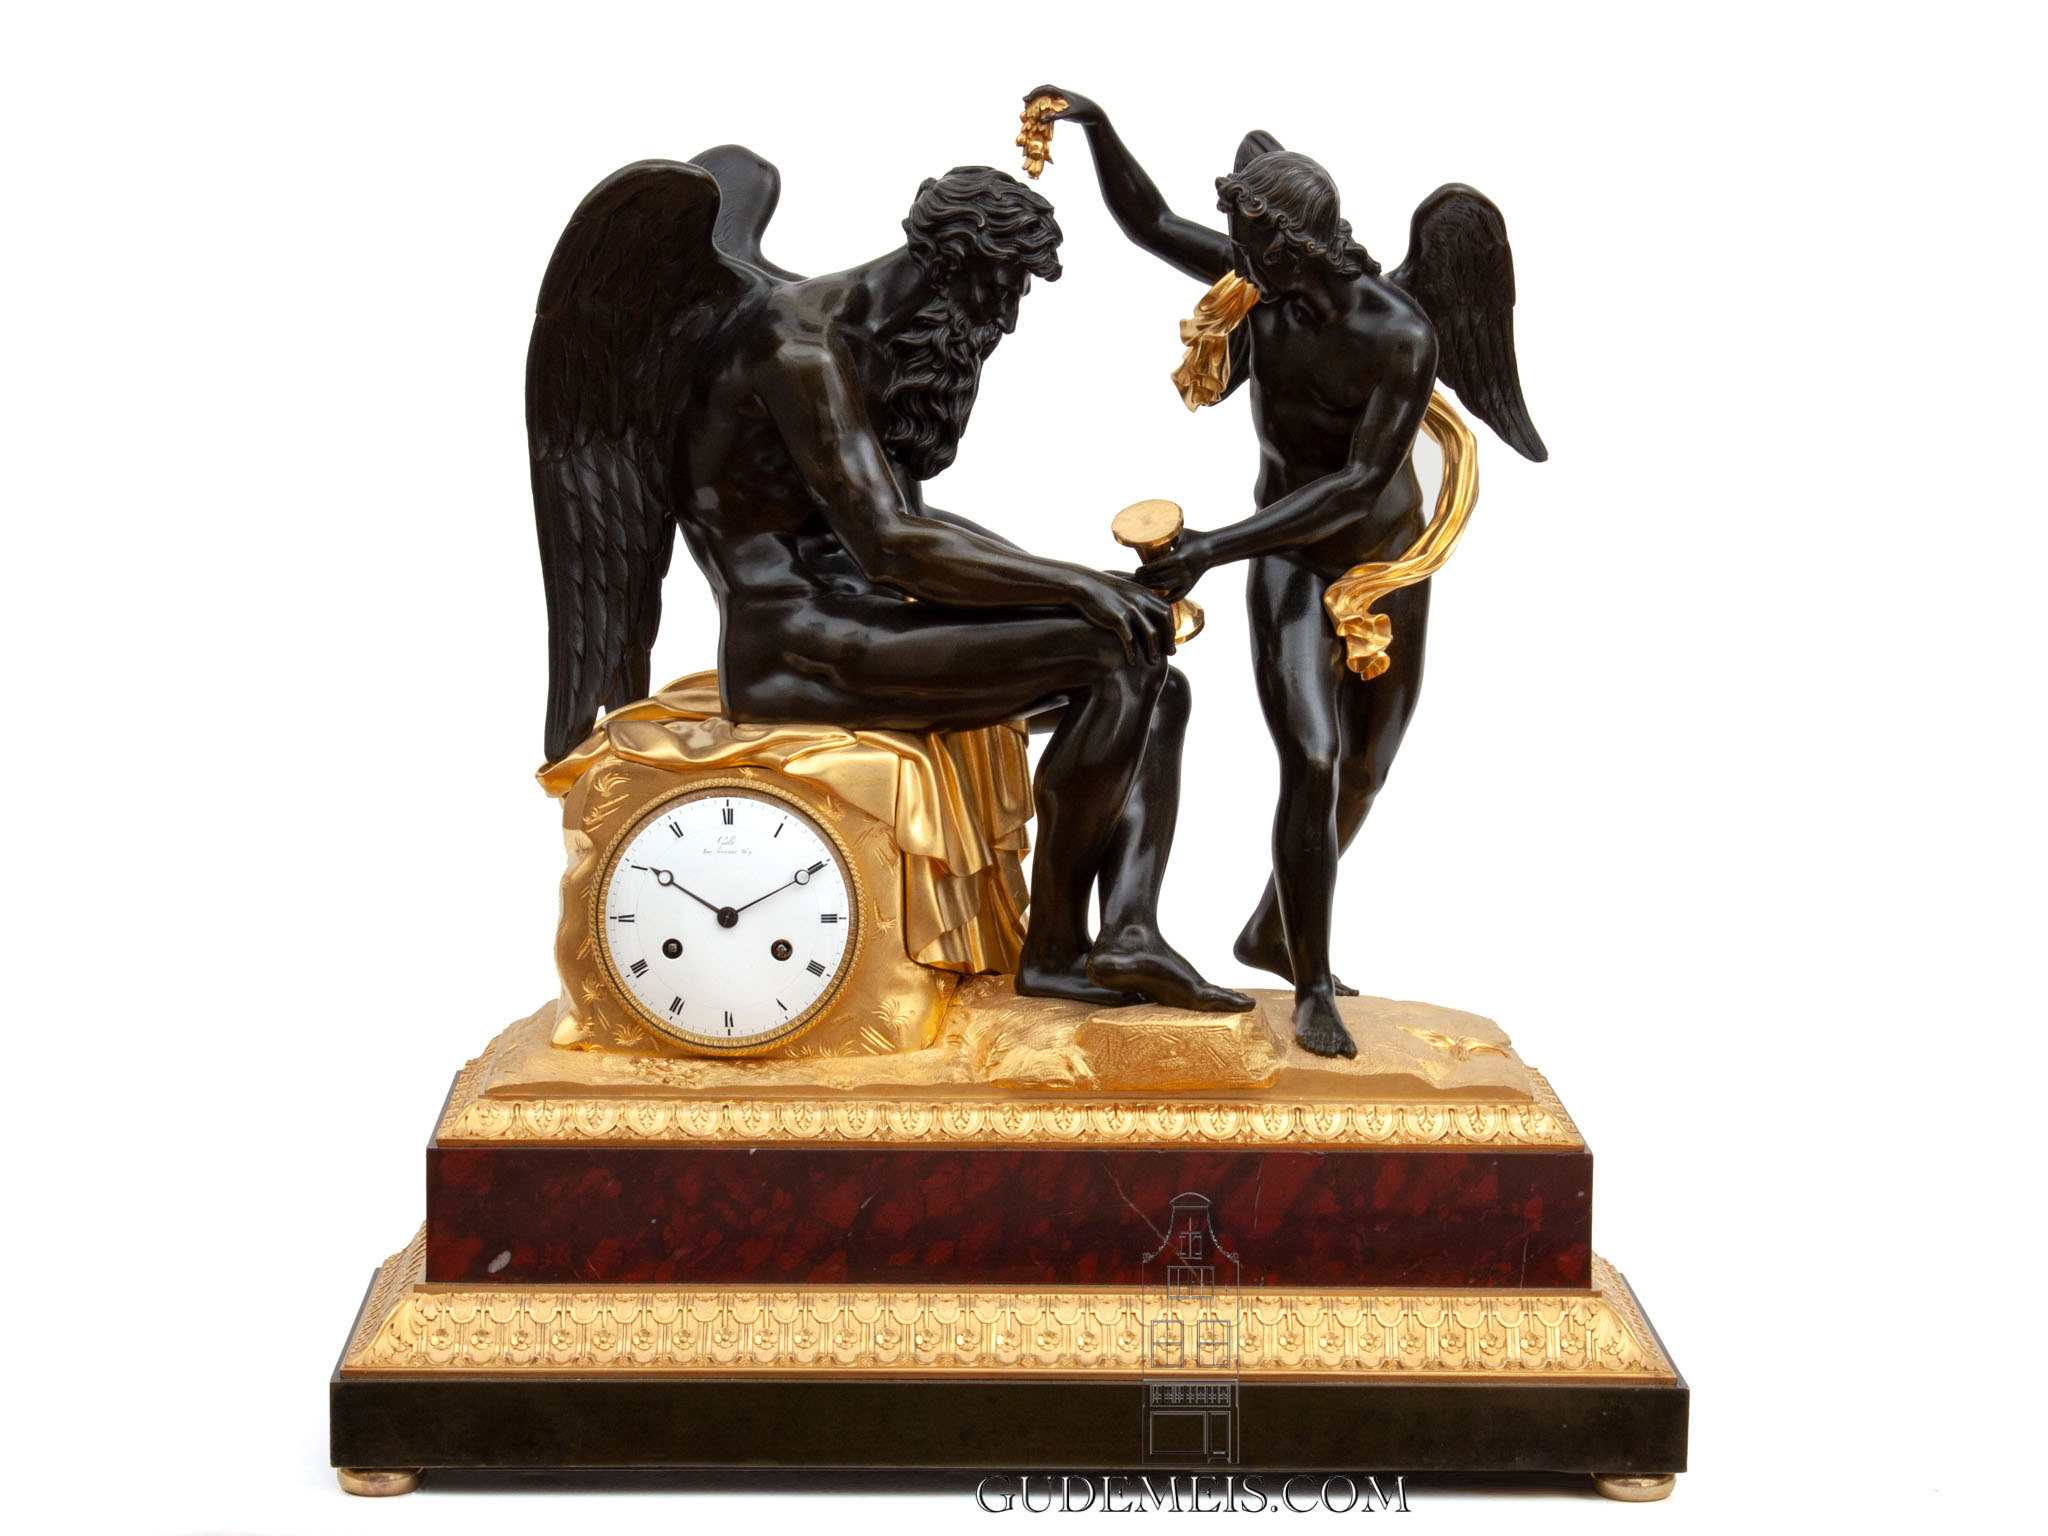 monumental-imposing-French-Empire-gilt-patinated-bronze-sculptural-striking-mantel-clock-Chronos-Amor-Cupid-Claude-Galle-